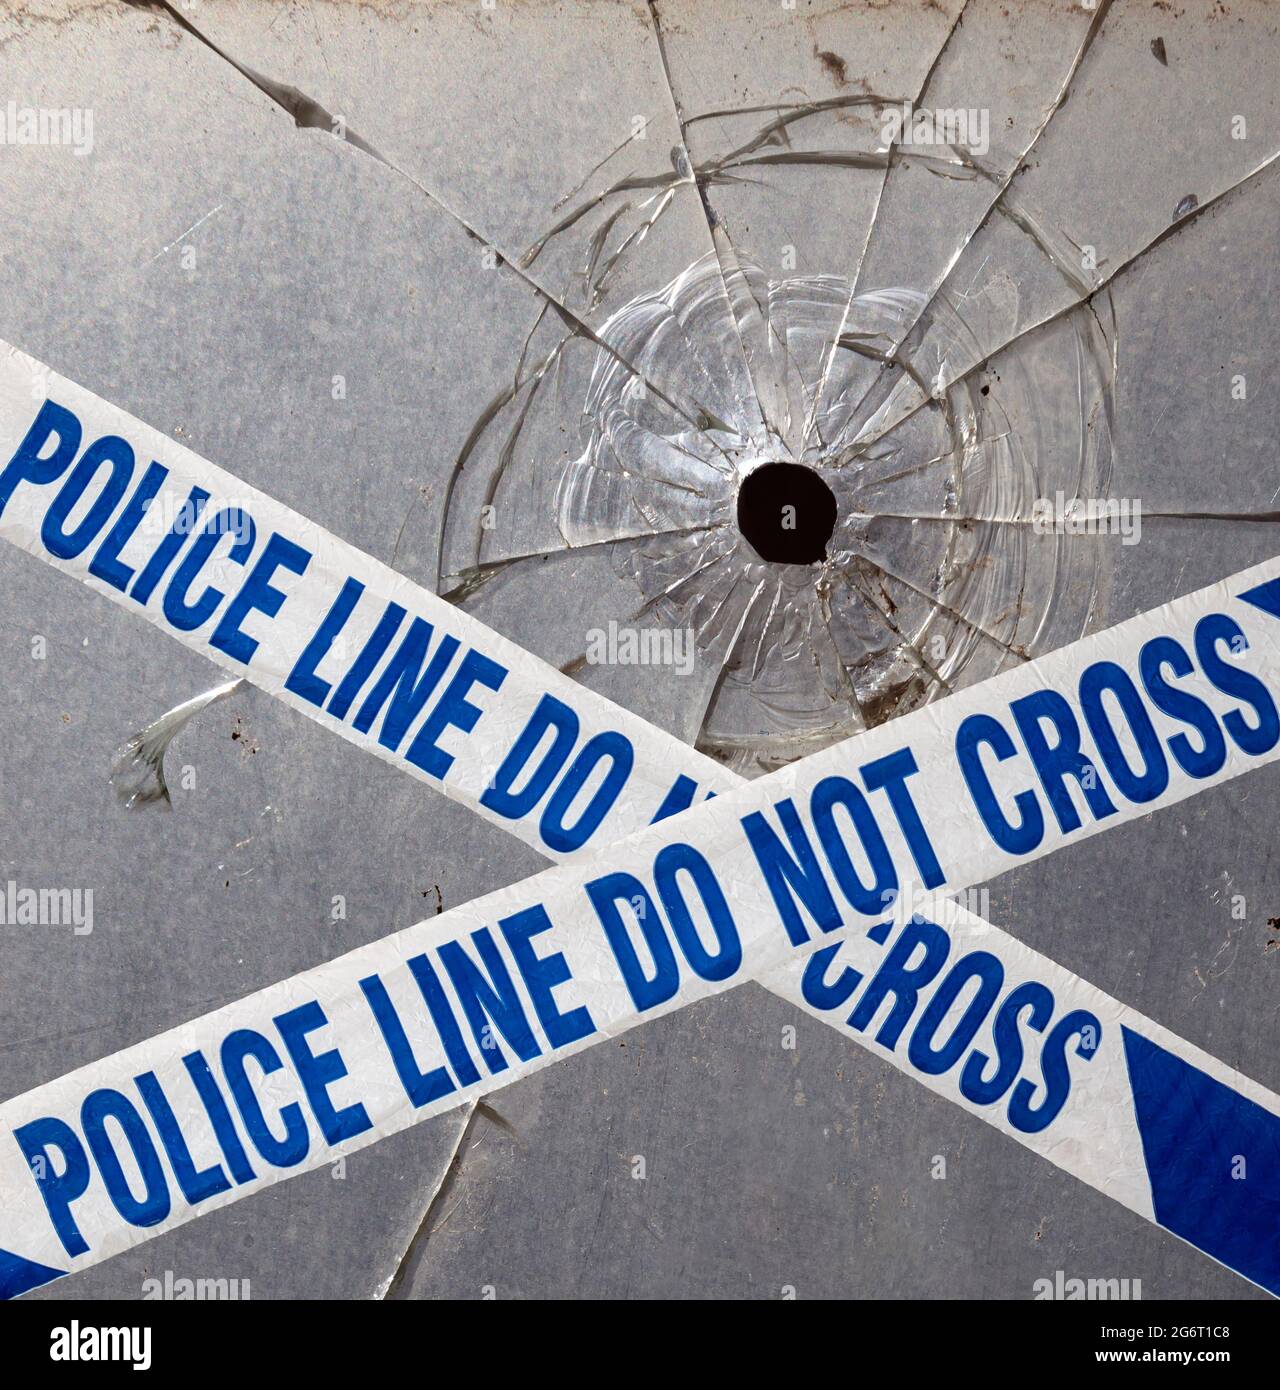 Bullet hole and Police tape. Stock Photo